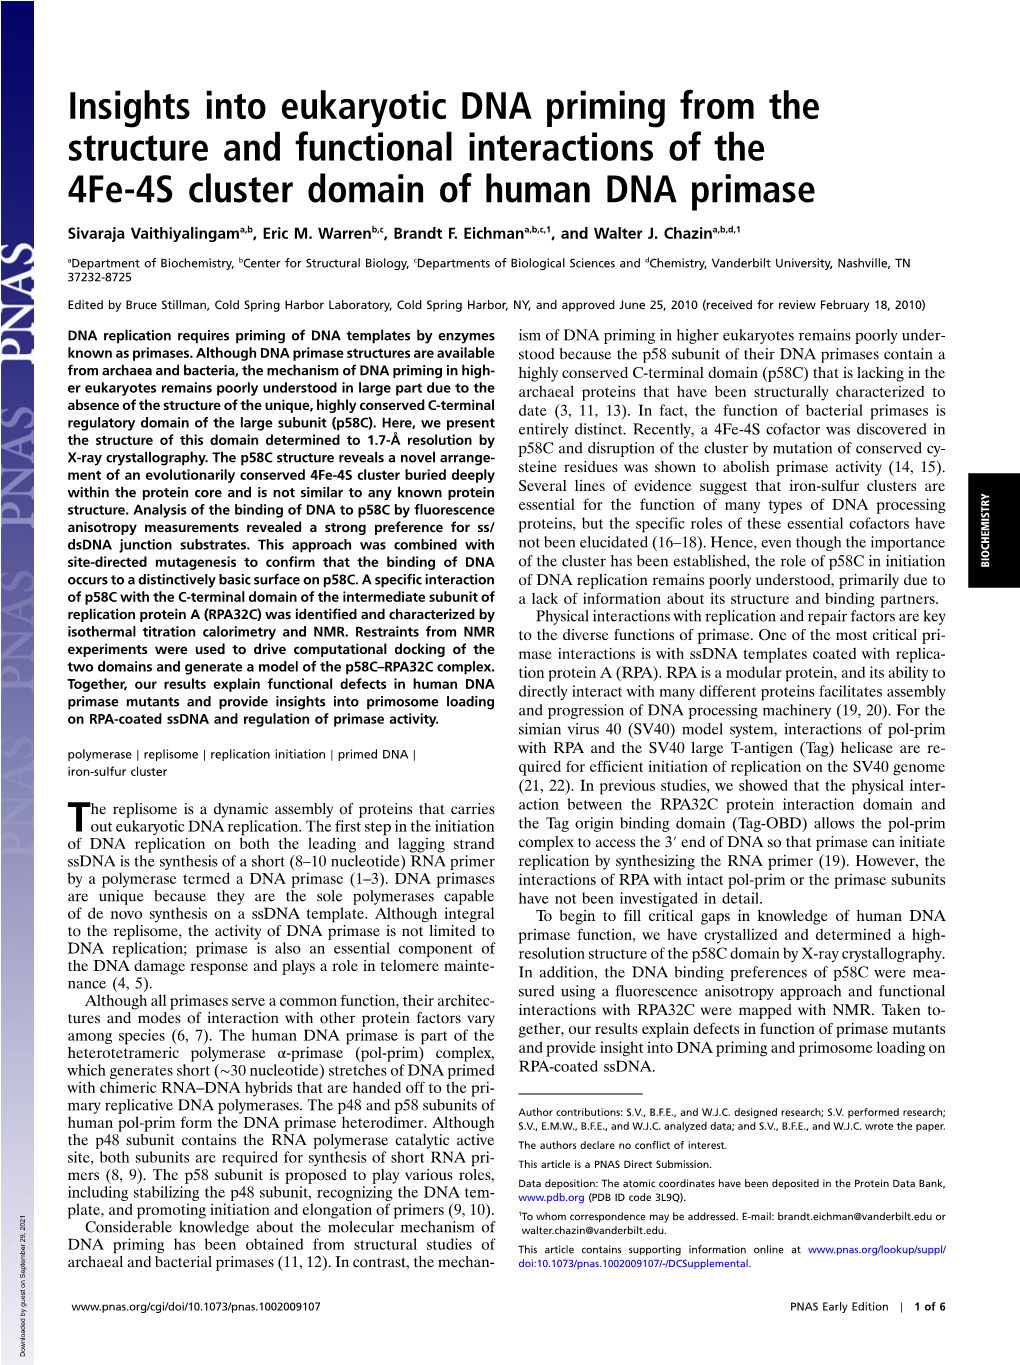 Insights Into Eukaryotic DNA Priming from the Structure and Functional Interactions of the 4Fe-4S Cluster Domain of Human DNA Primase